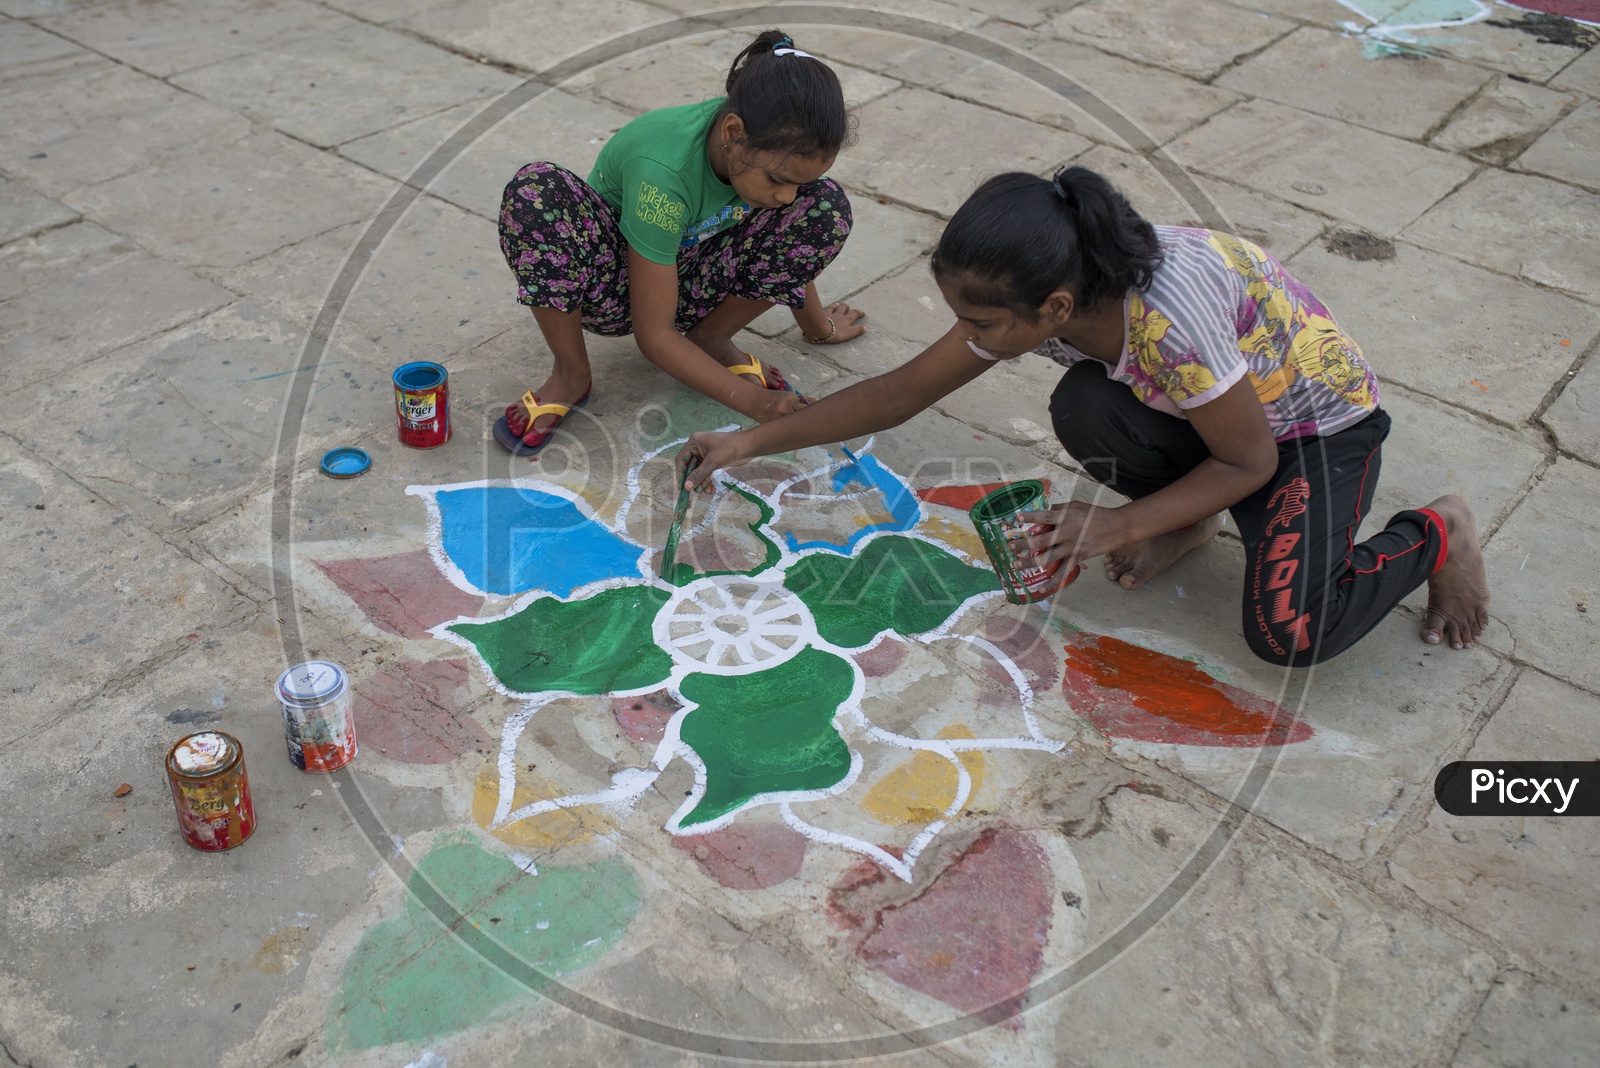 Kids decorating the ghats near their house for Dev Diwali.